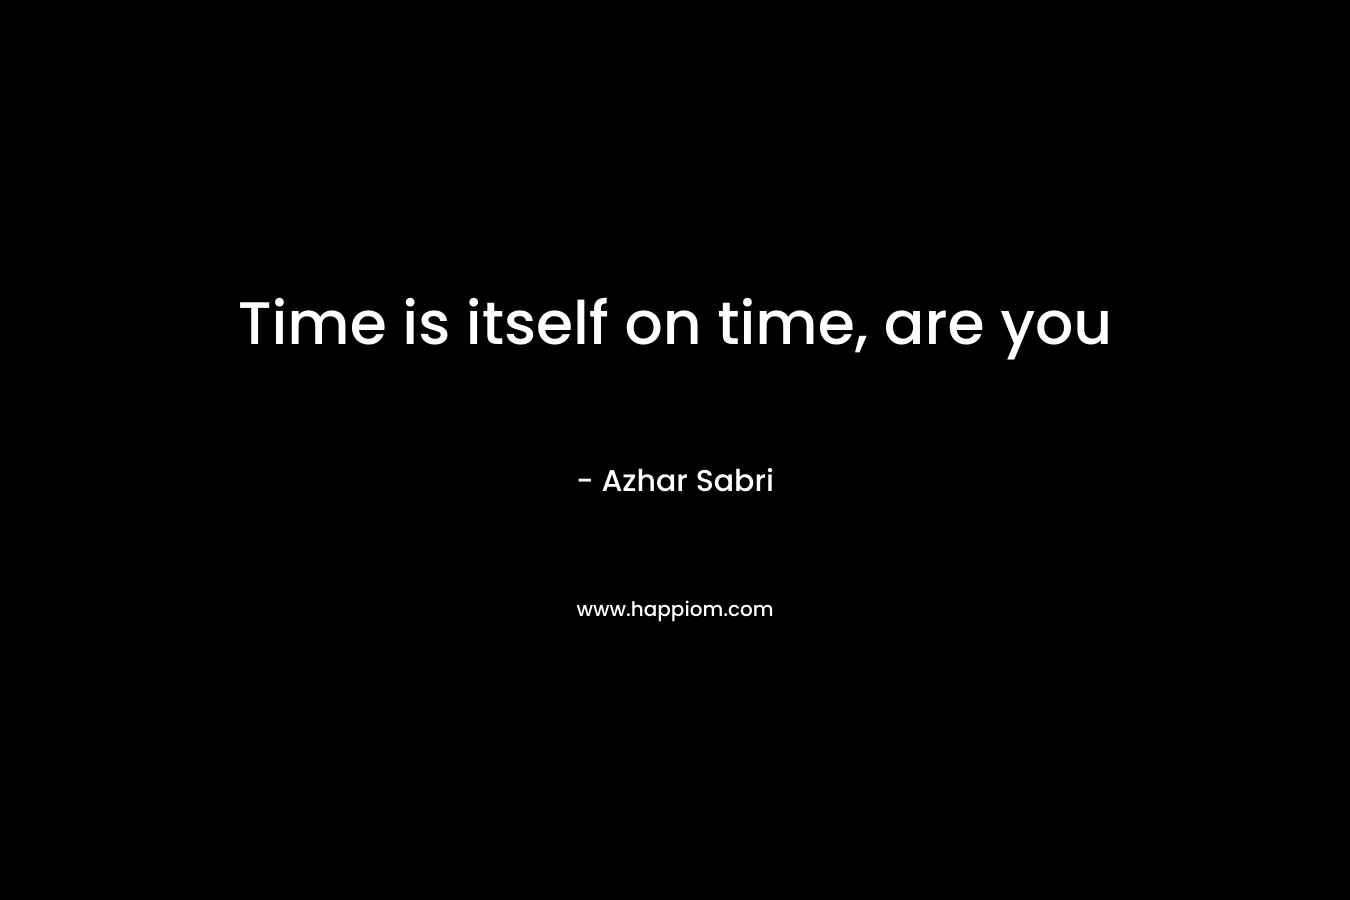 Time is itself on time, are you – Azhar Sabri